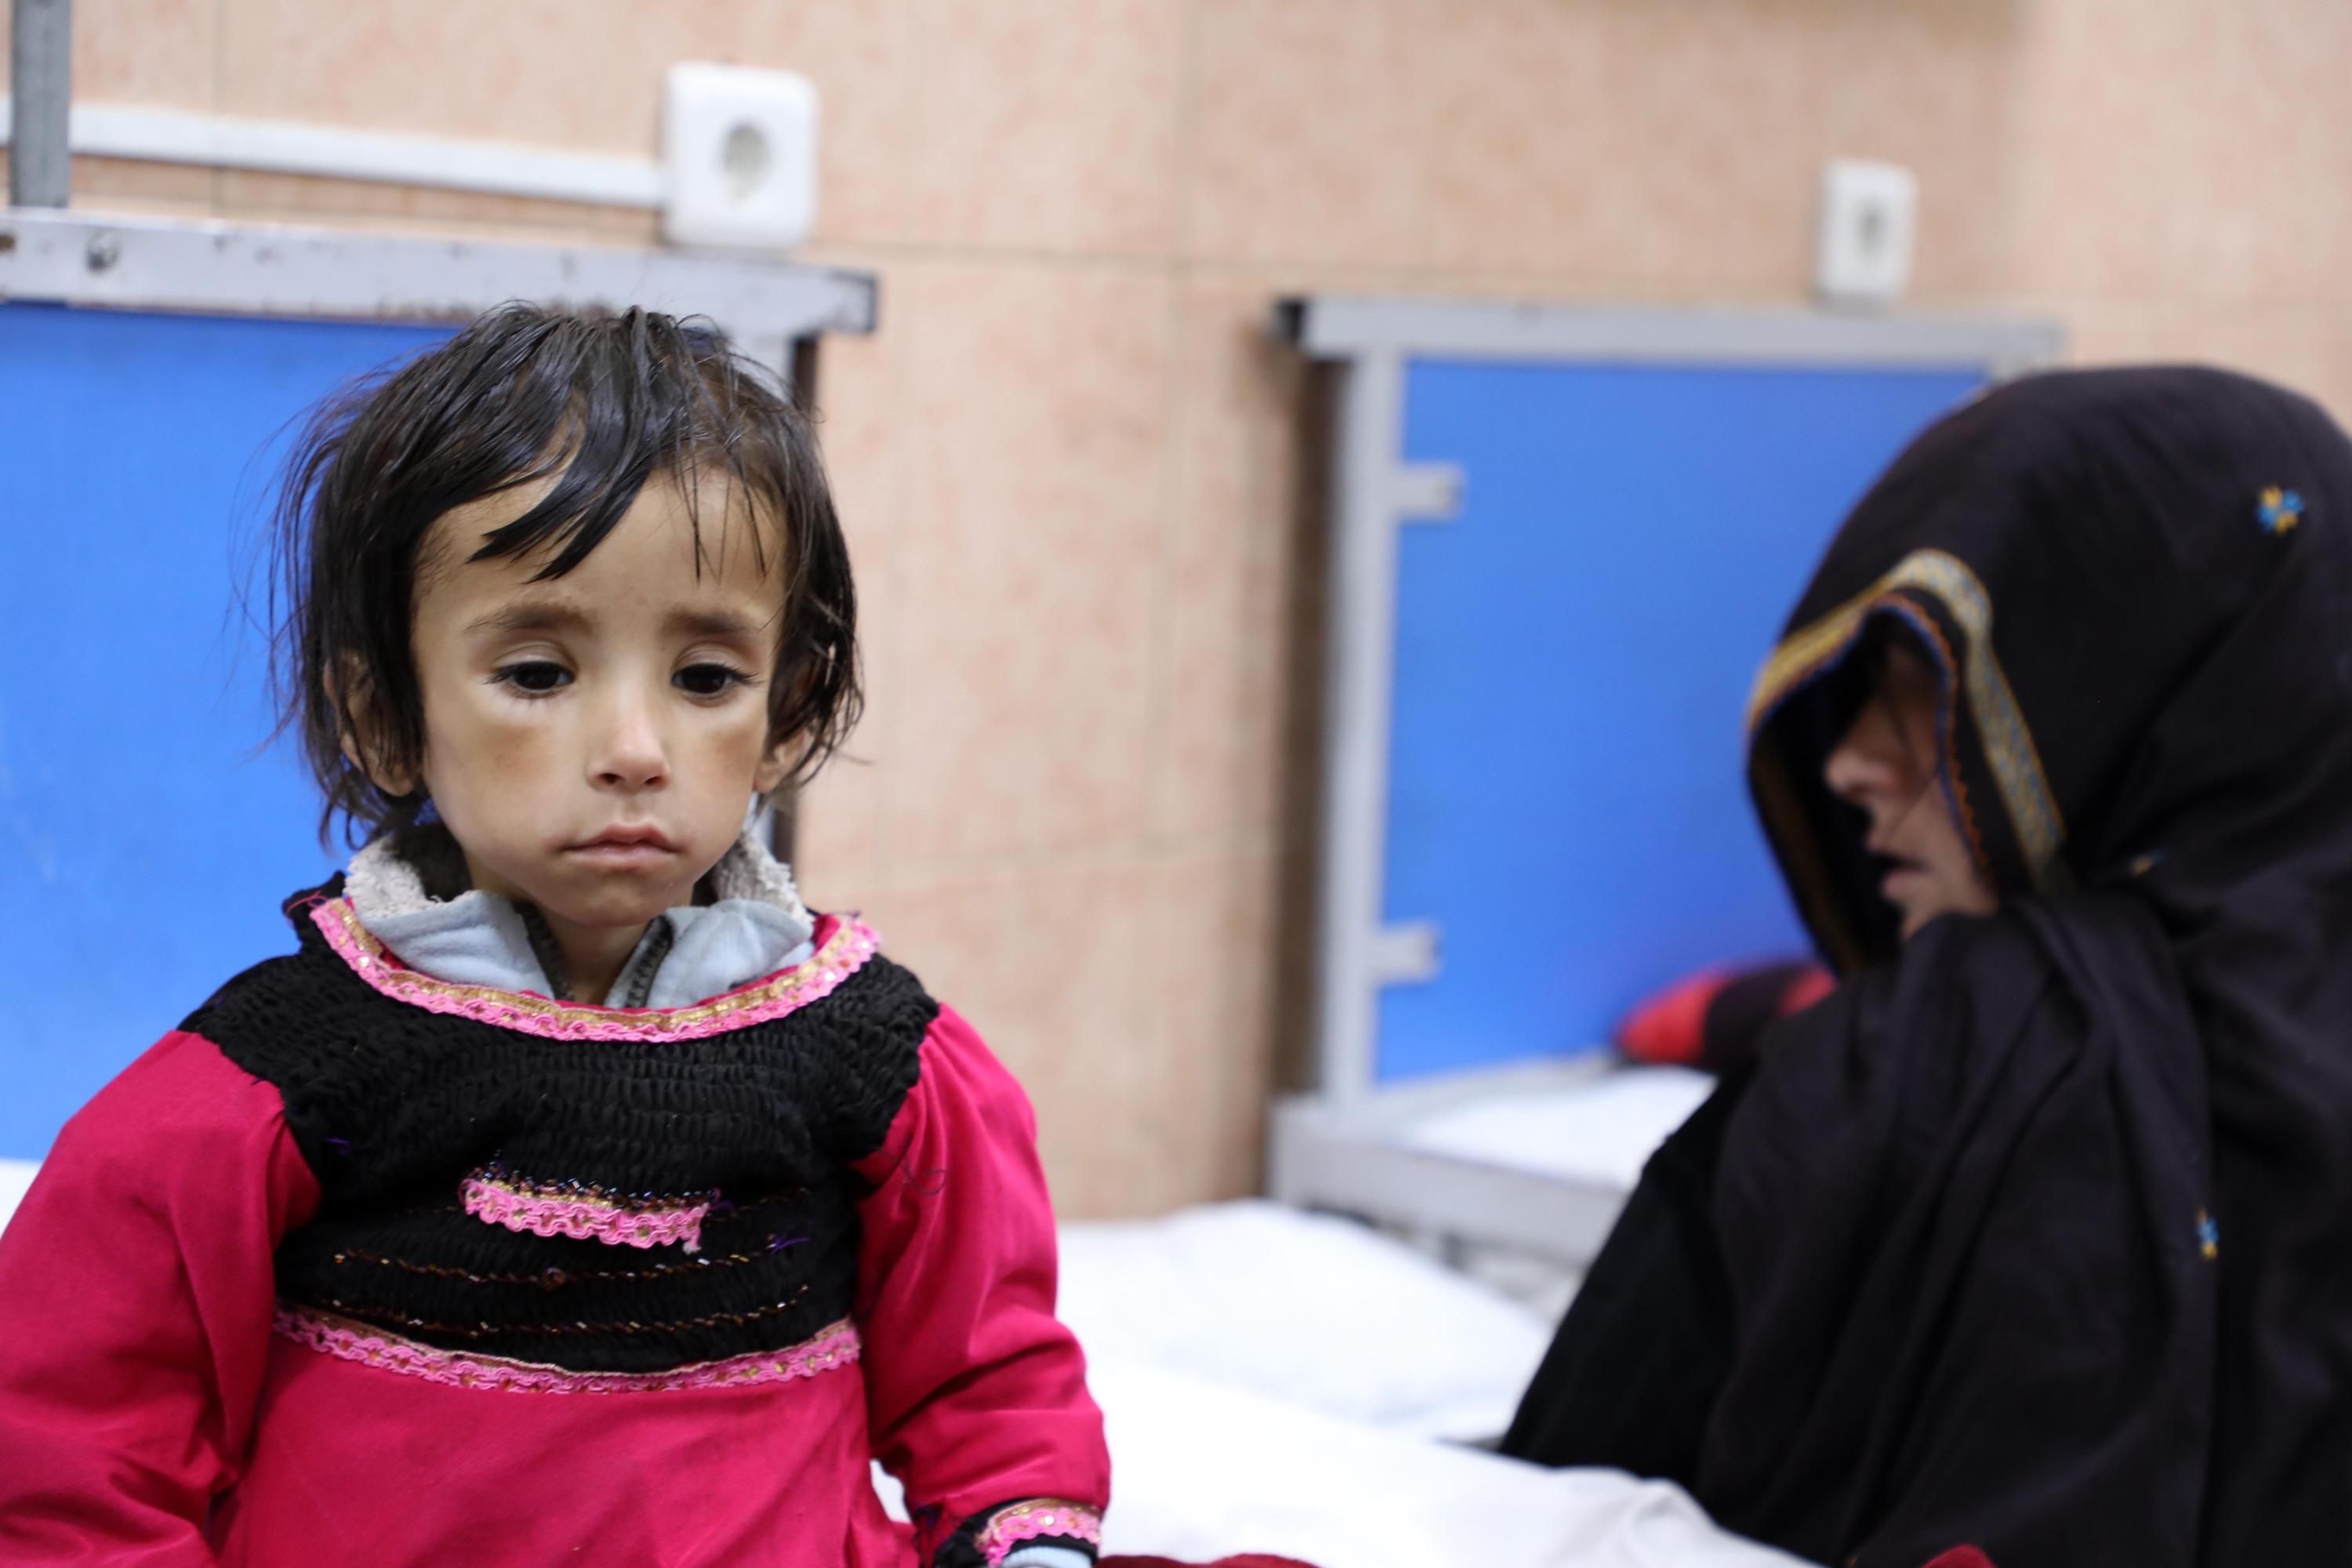 An Afghan child suffering from malnutrition is seen at a hospital in Kabul, Afghanistan on January 16, 2022